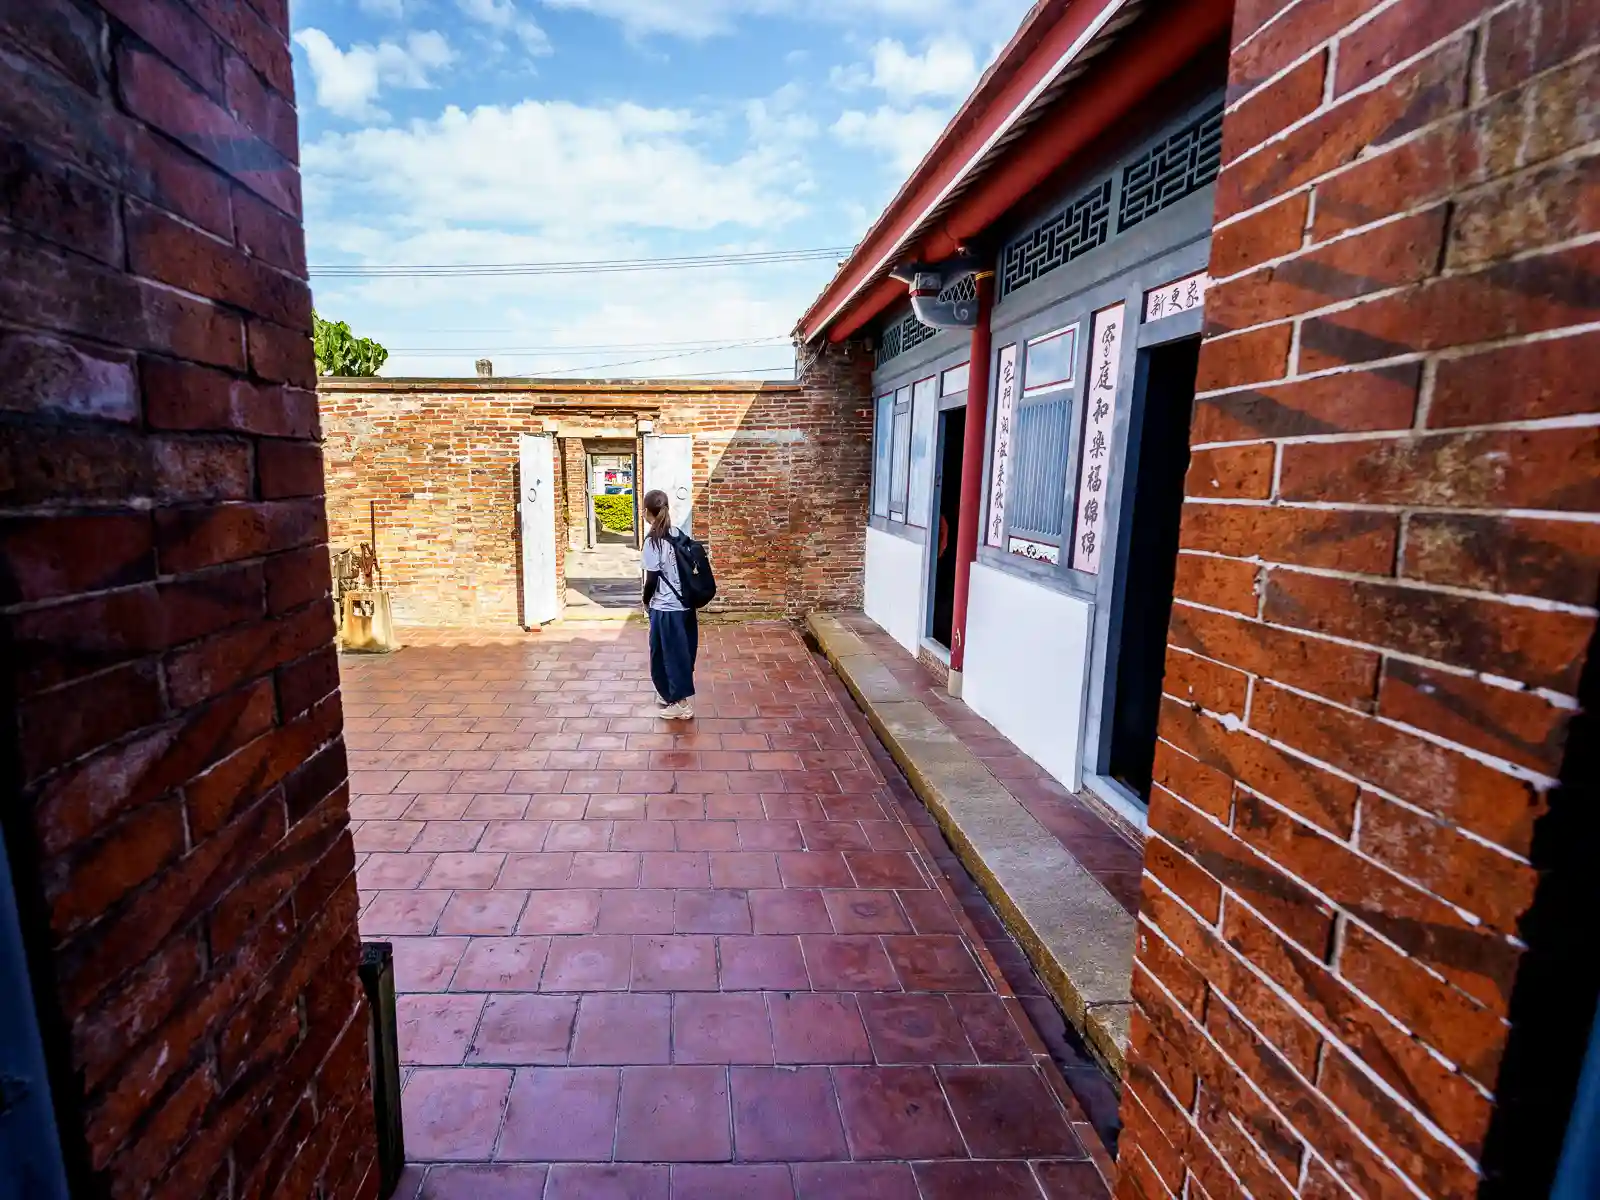 A tourist walks around one of the red-brick courtyards in Ting's Family Historical Residence.